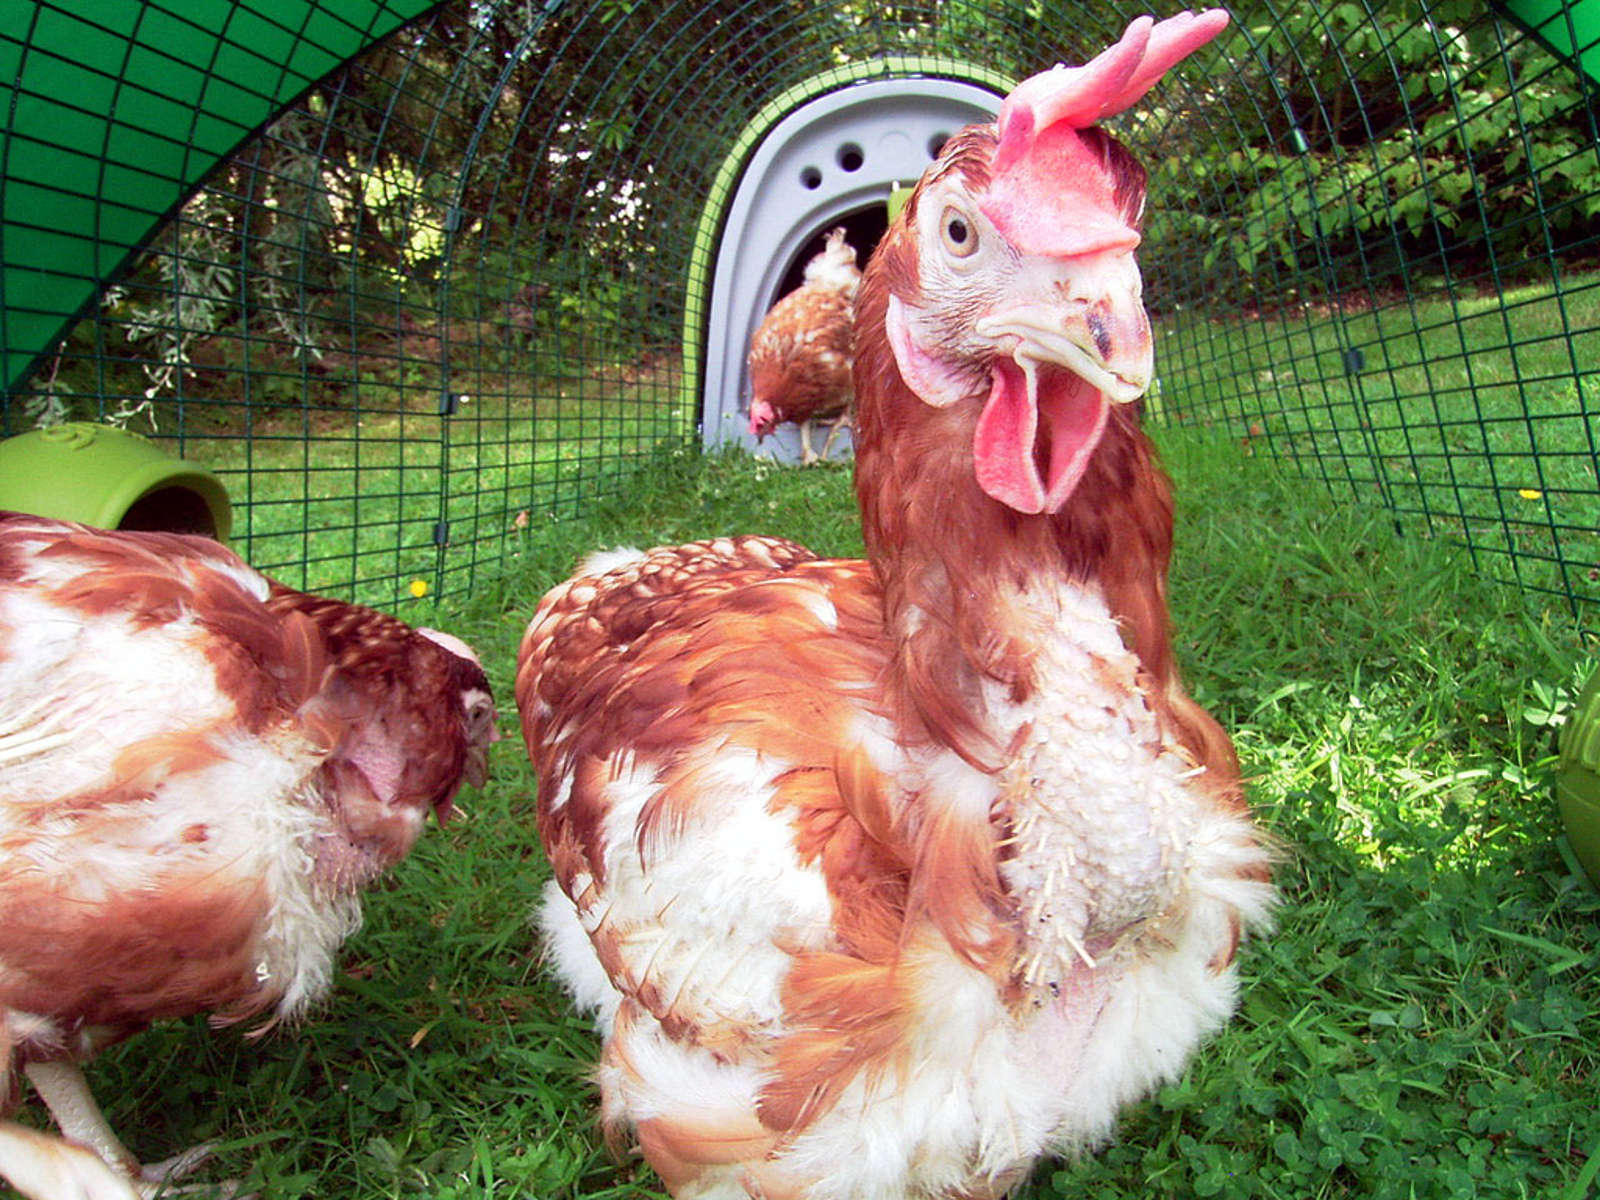 Chicken or Broiler, Cow or Steer, Owner or Guardian? Liberating the Language of Animal Abuse